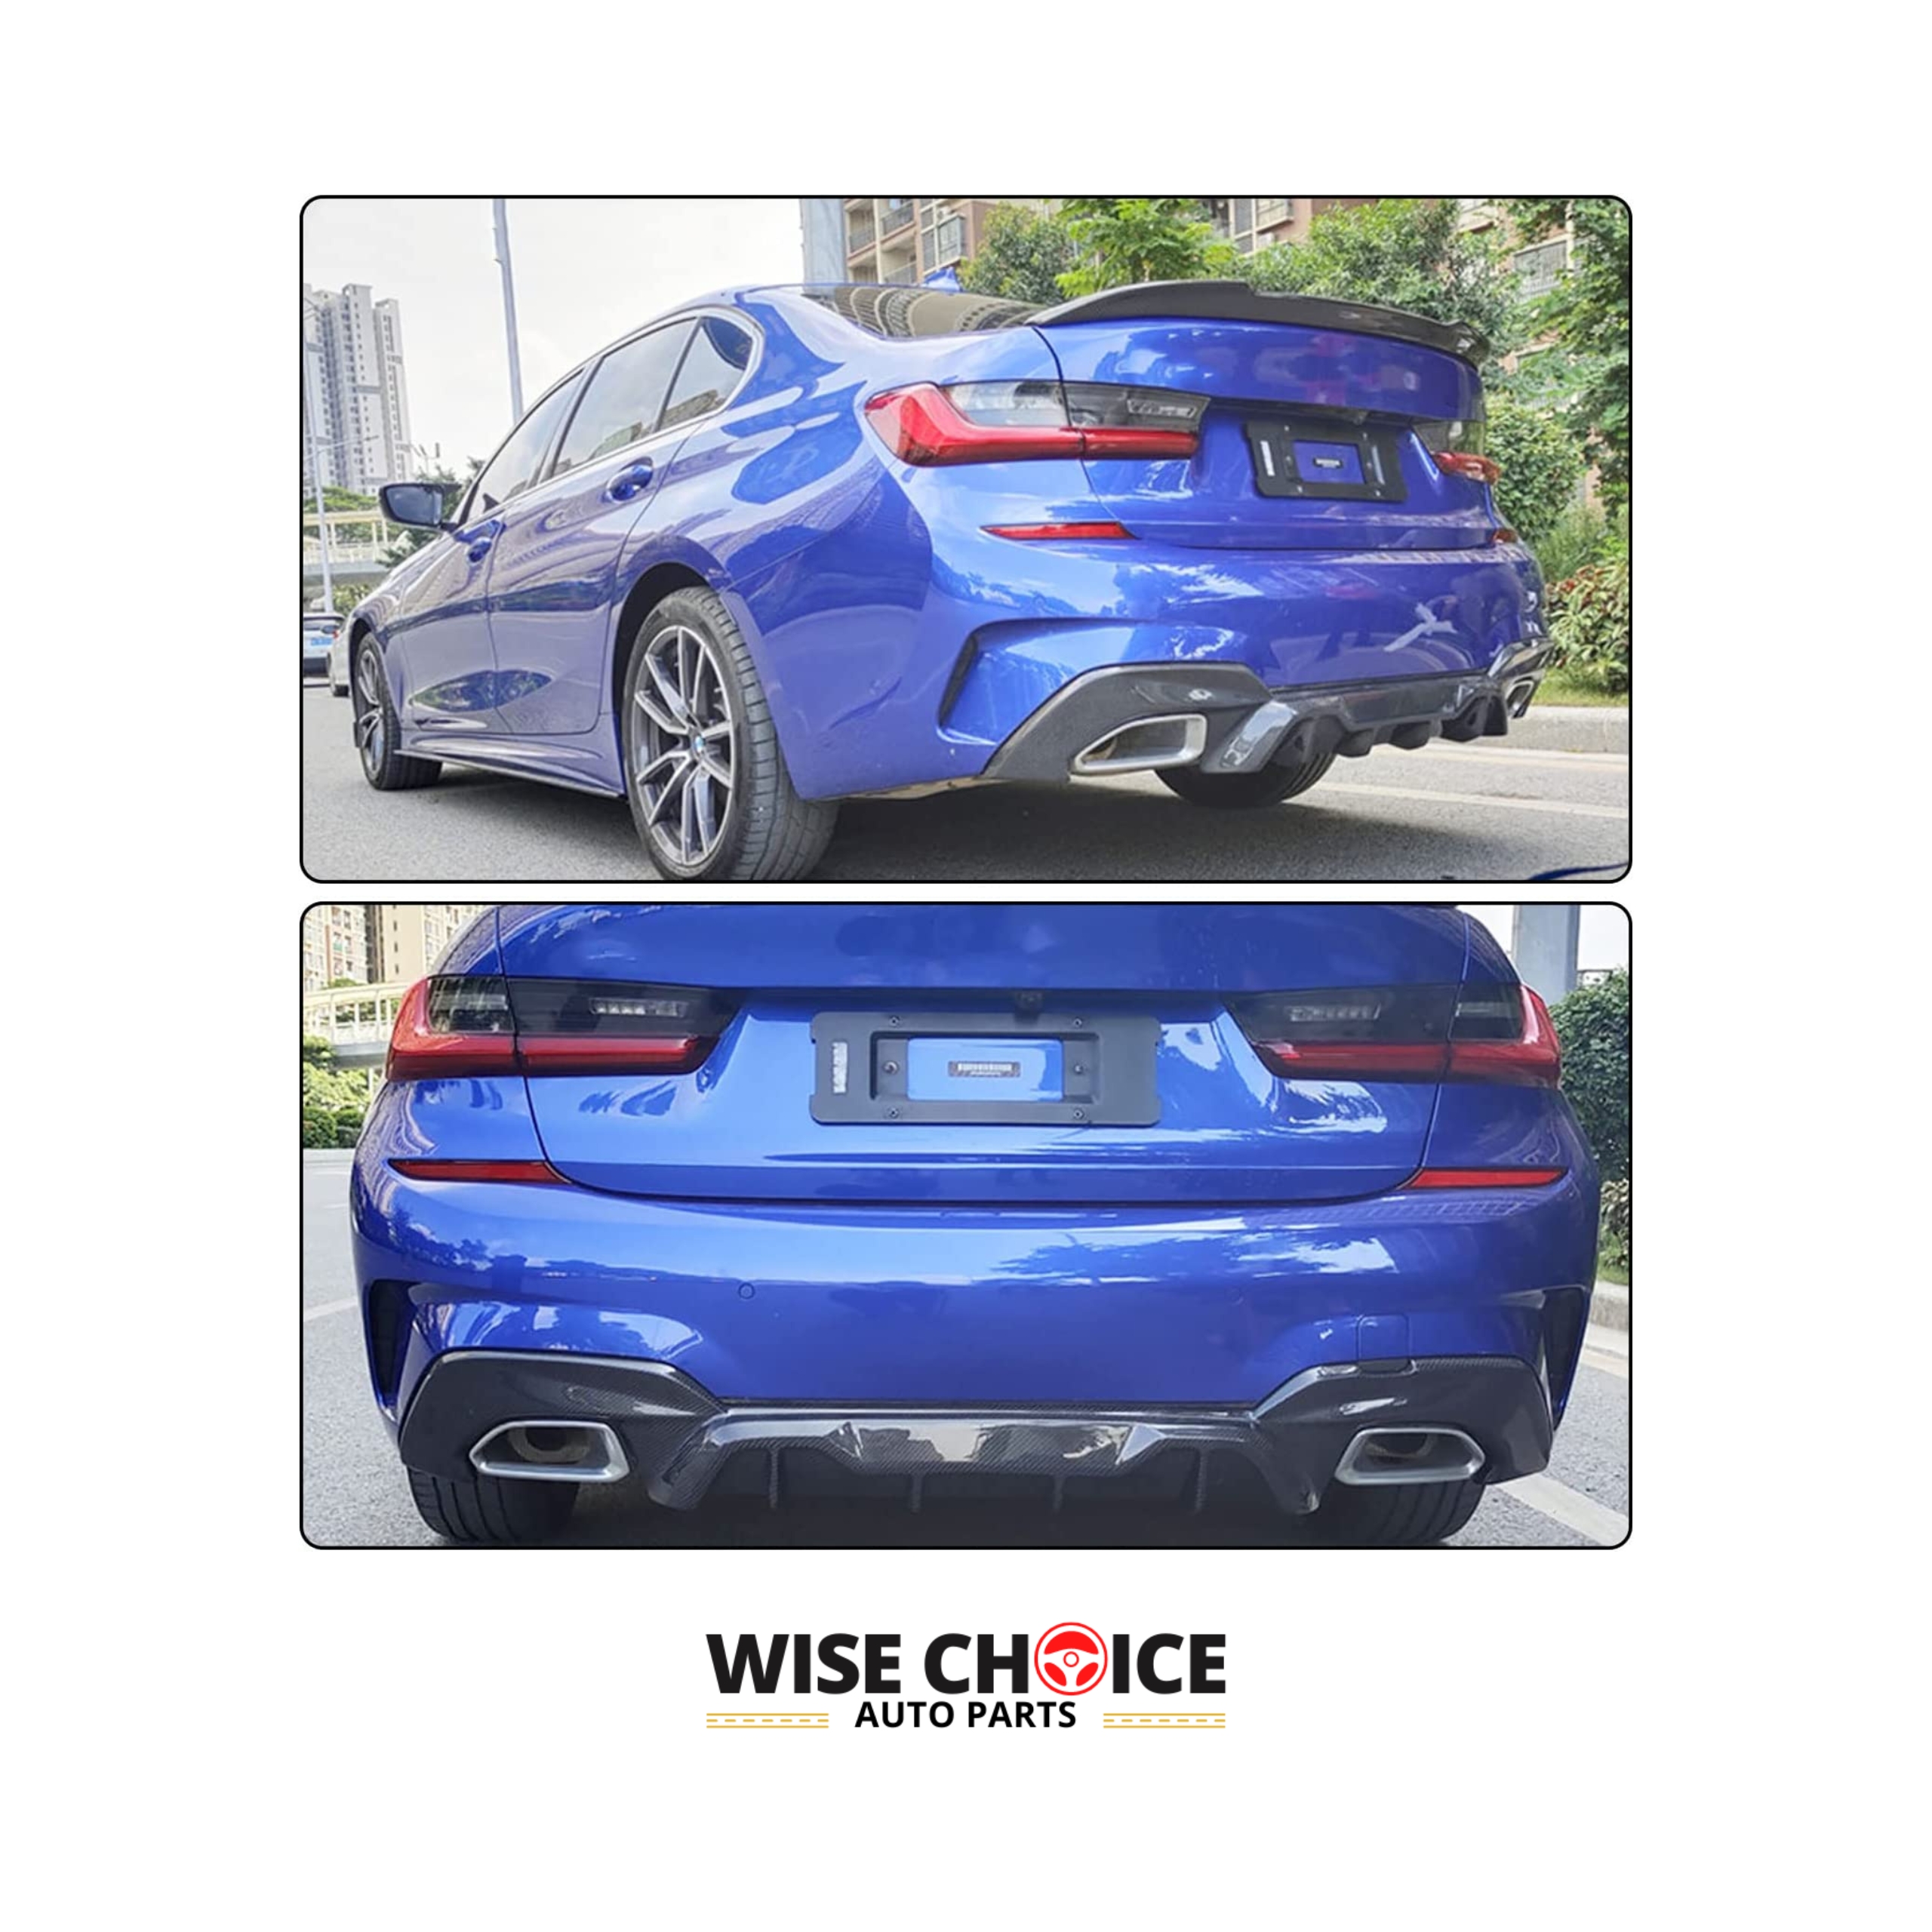 2019-2022 G20 BMW 3 Series M-Sport Carbon Fiber Rear Diffuser installed on a BMW M Sport Sedan, showing its polished, shiny surface.